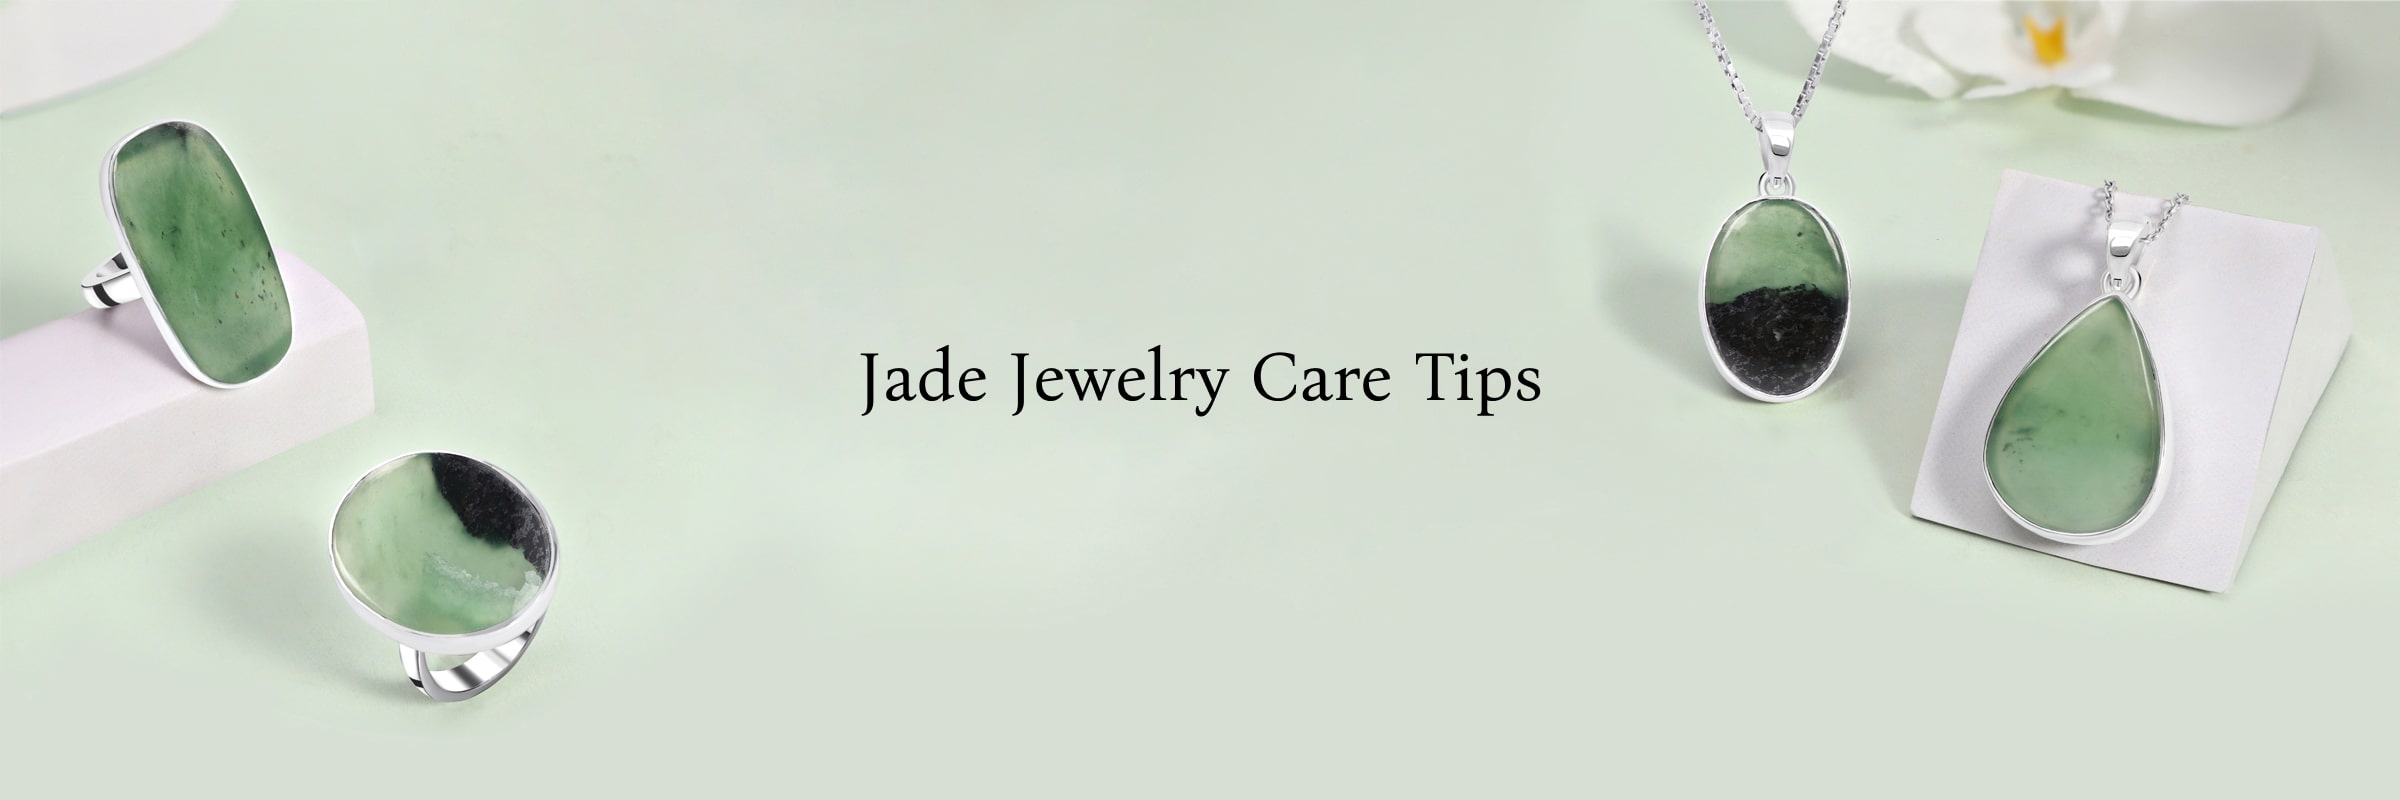 How to Care for Your Jade Jewelry